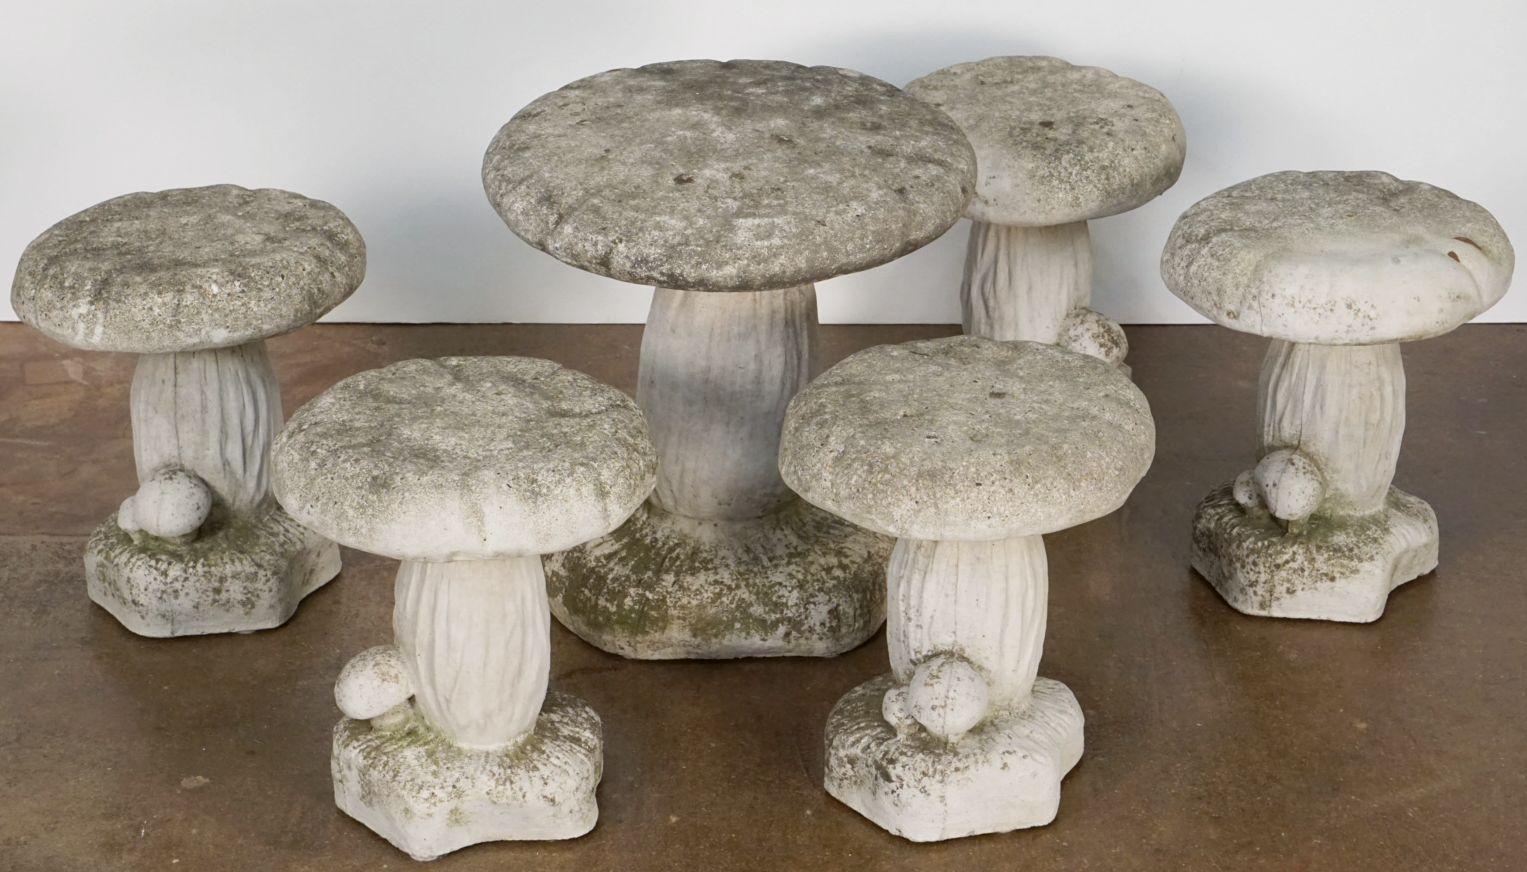 A fine set of Belgian garden mushroom (or toadstool fungi) sculptures of composition stone featuring naturalistic detail and of varying sizes.

The largest has a height of 18 inches and a top diameter of 16 inches

The other five have dimensions as